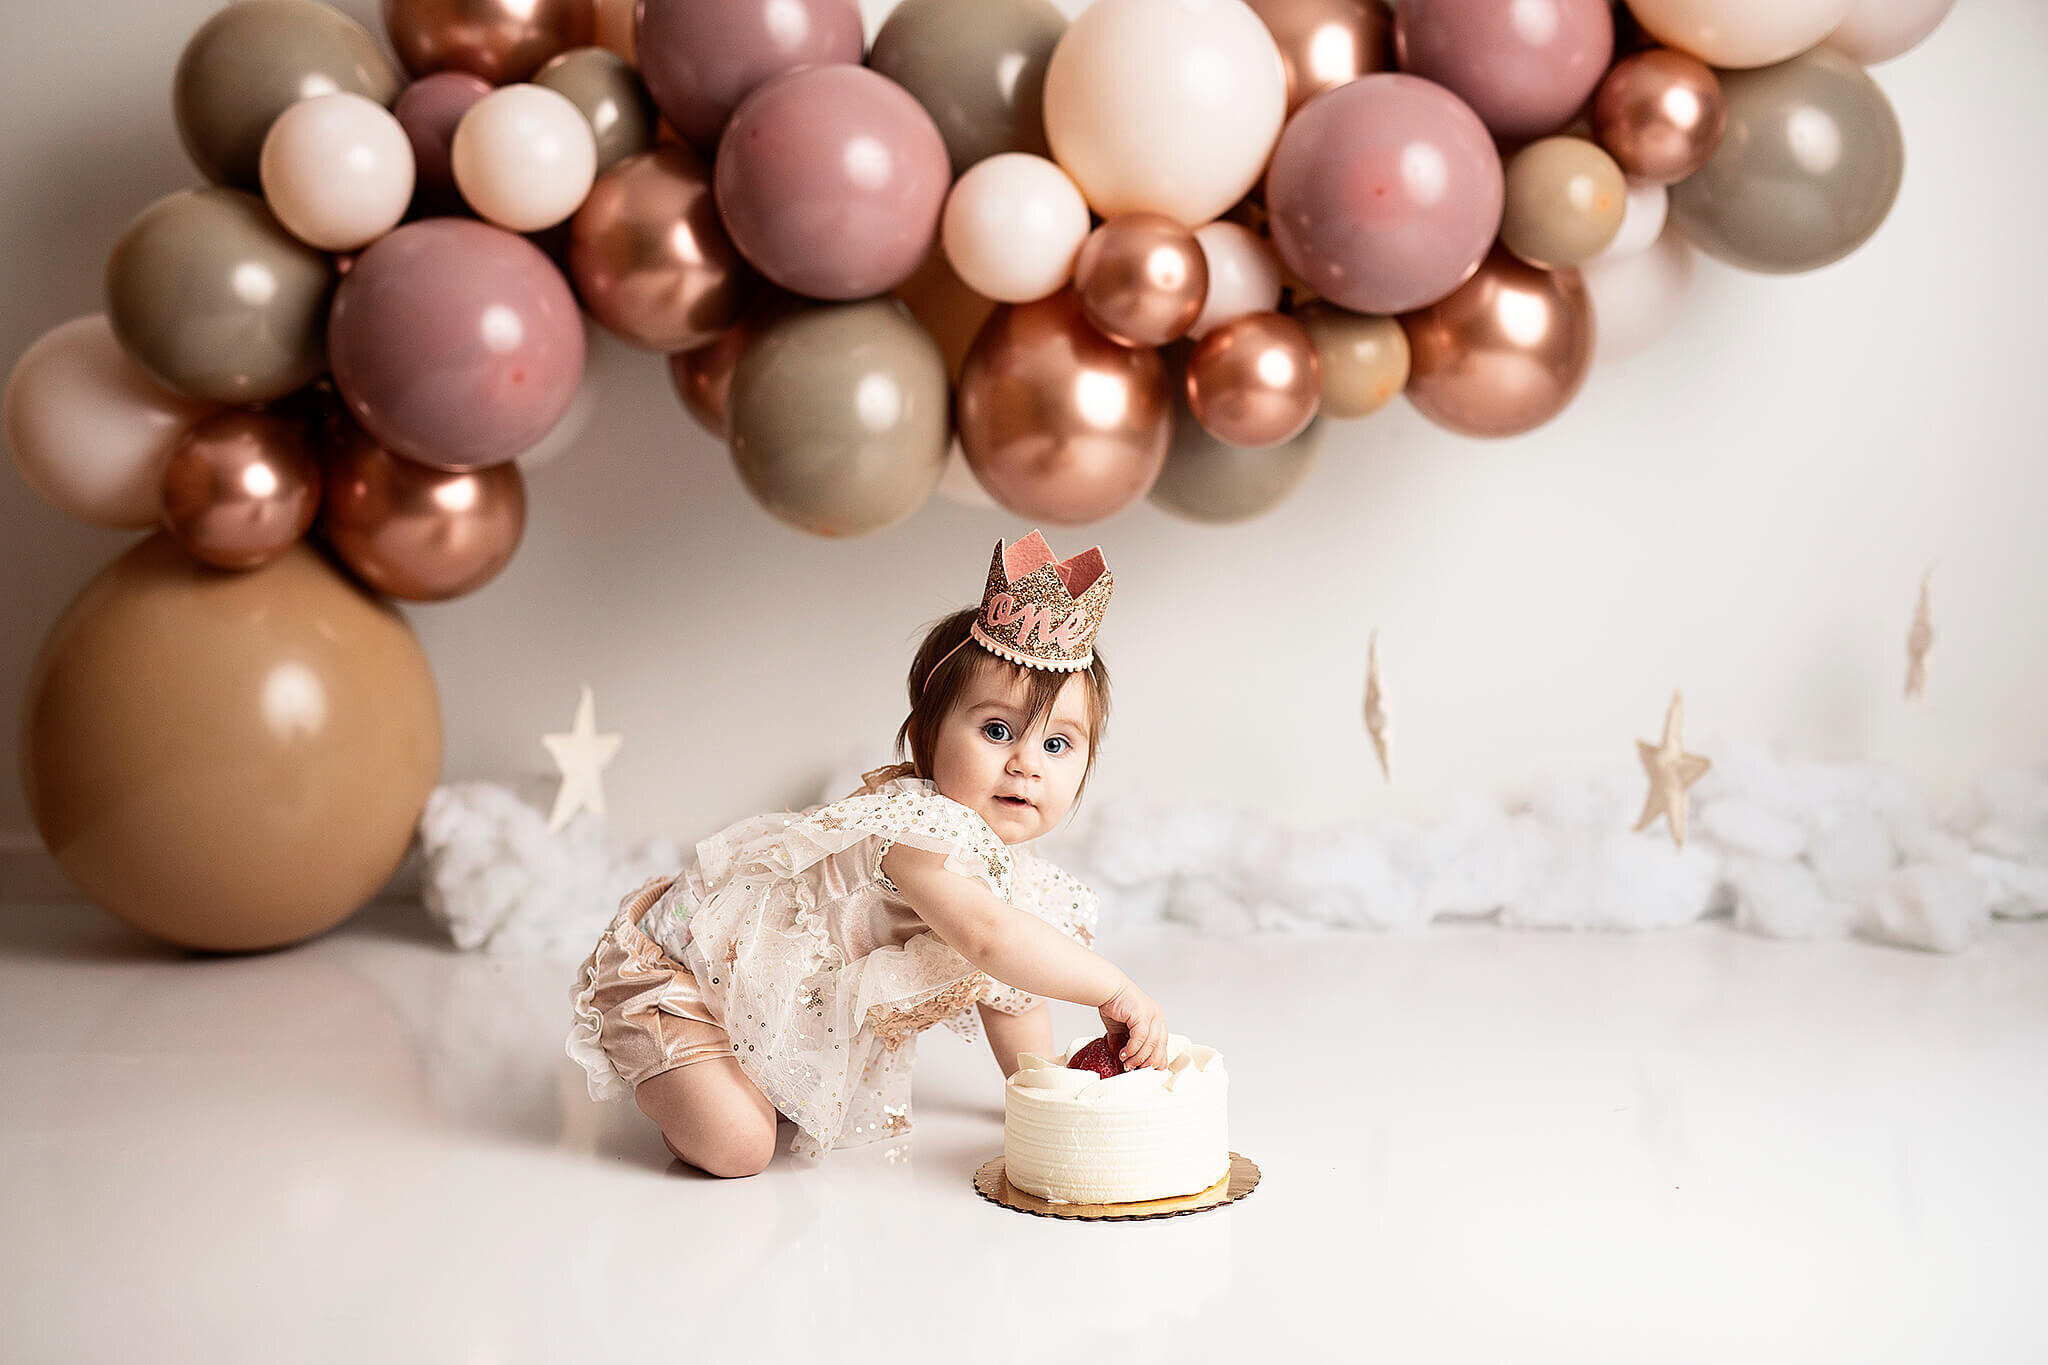 One year old in star outfit with cake and pink, brown and mauve ballon arches and stars in bucyrus ohio photography studio